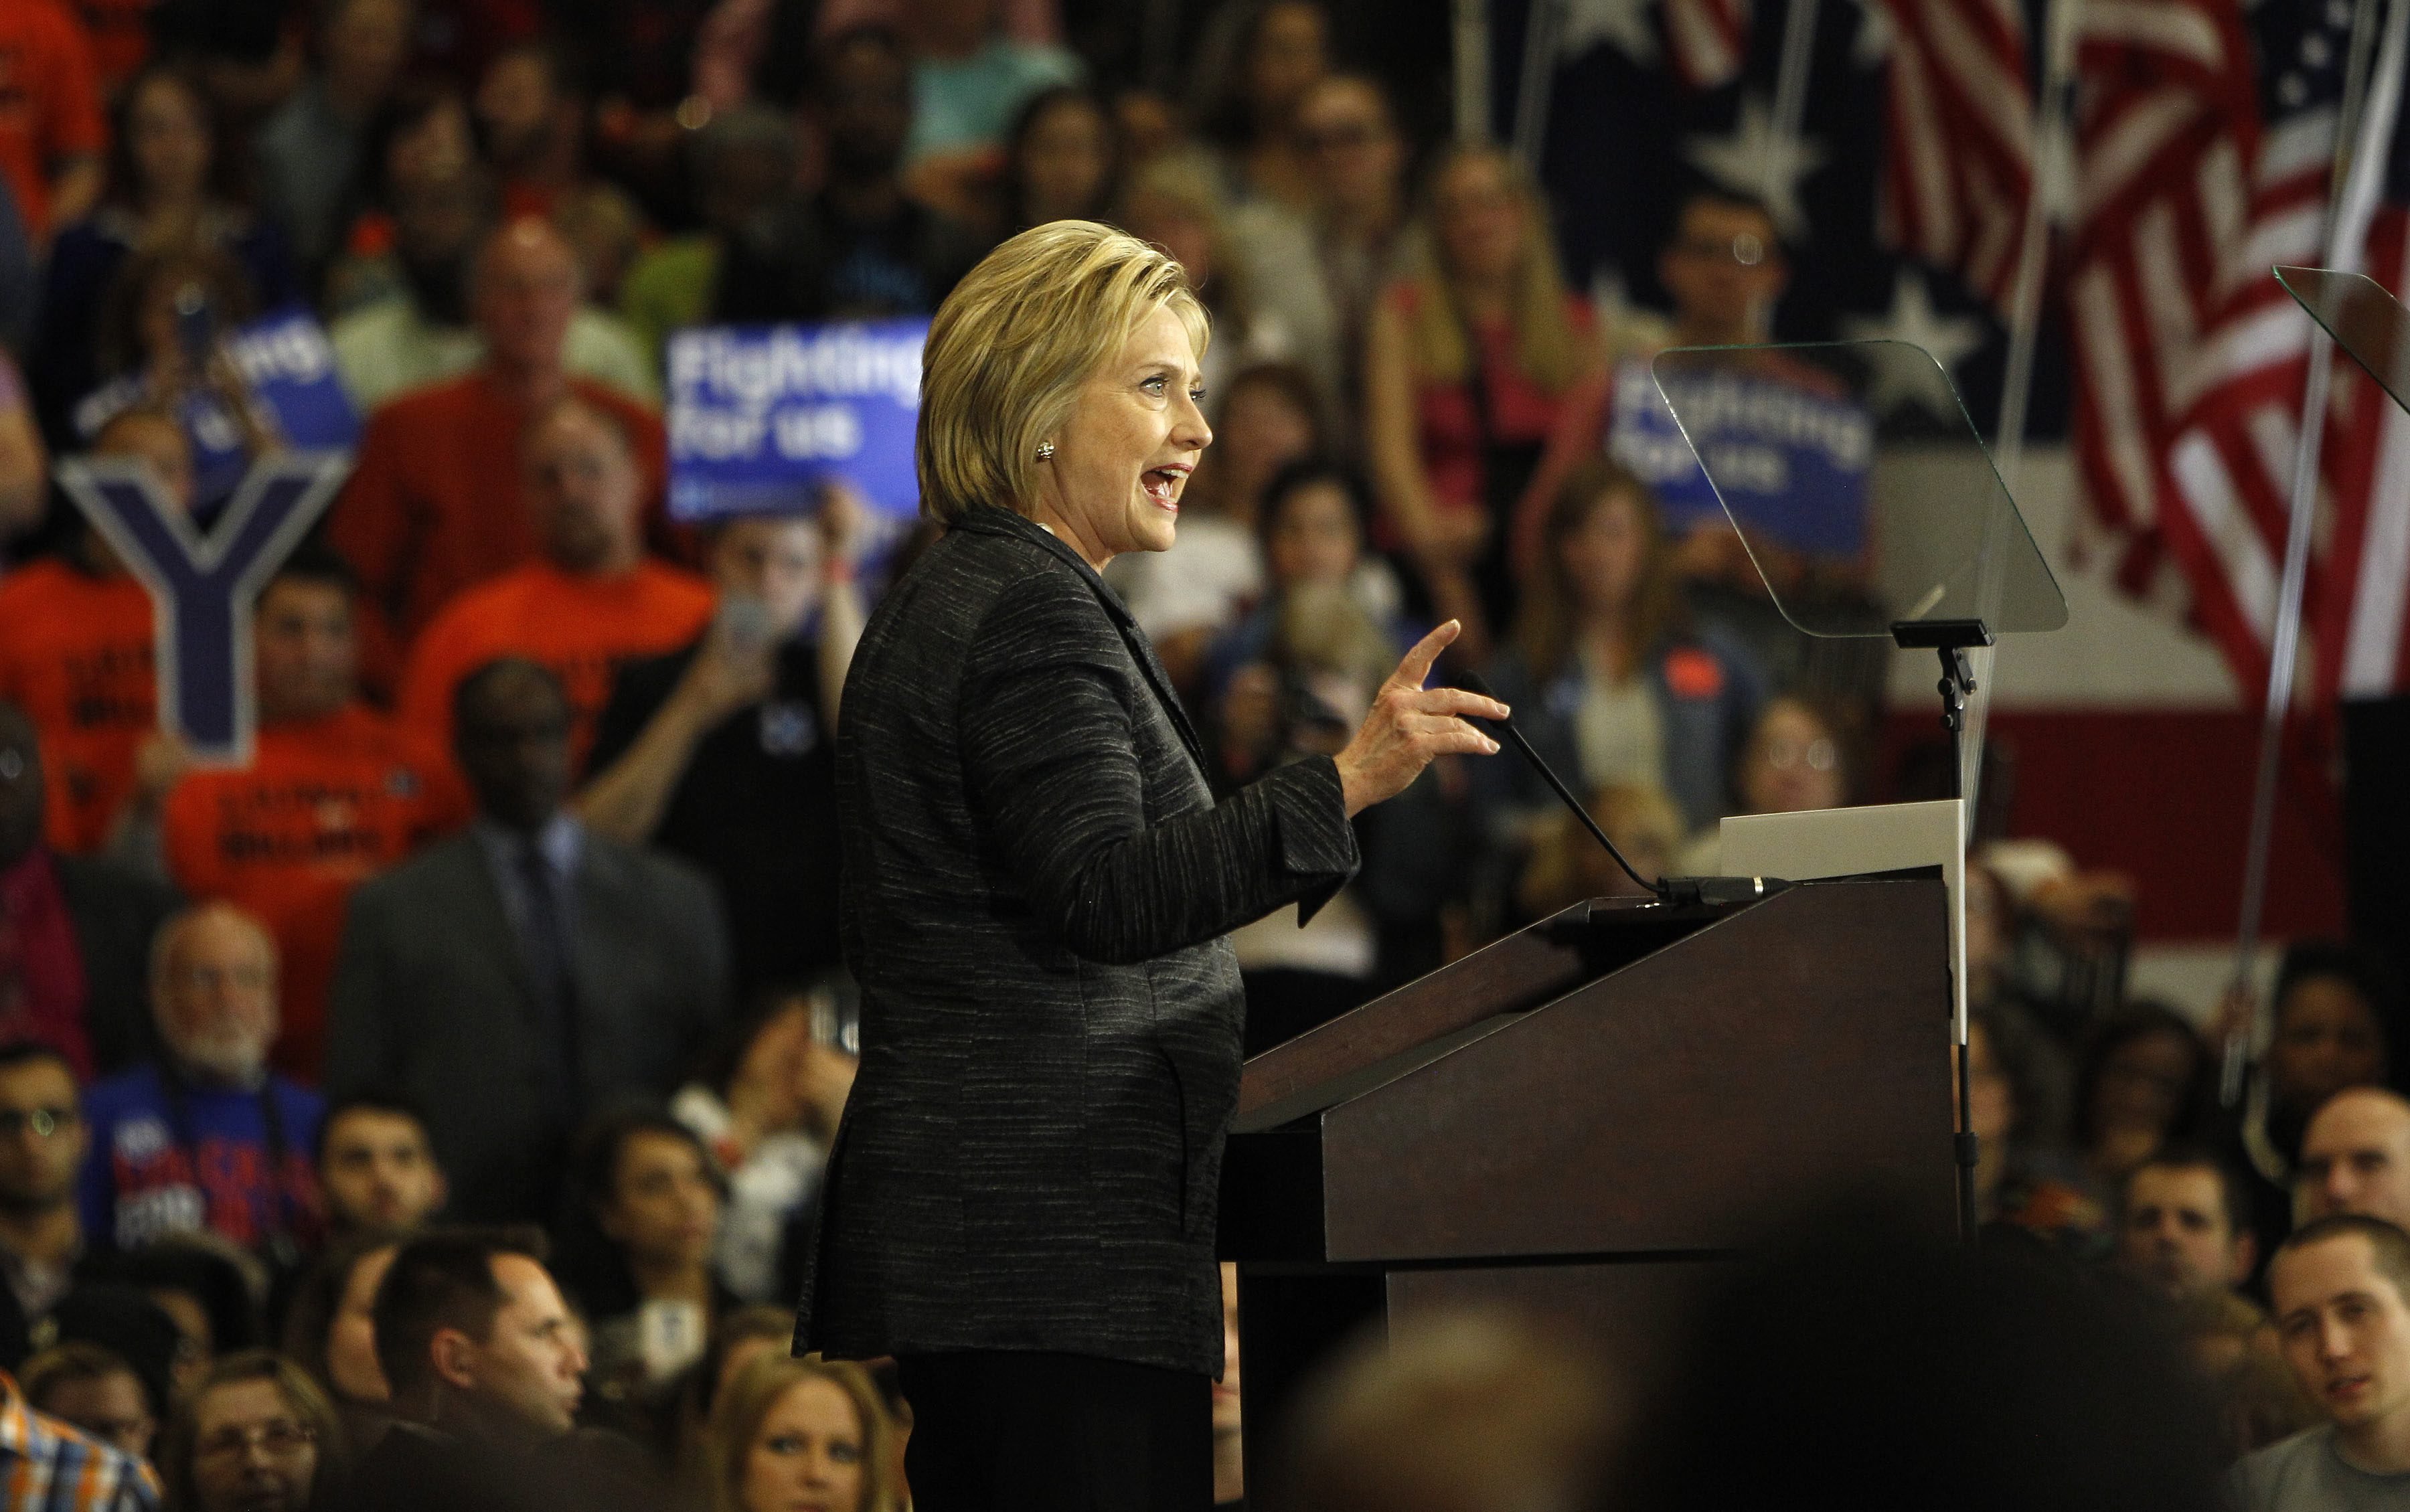 Hillary Clinton campaigns in Cleveland, Ohio